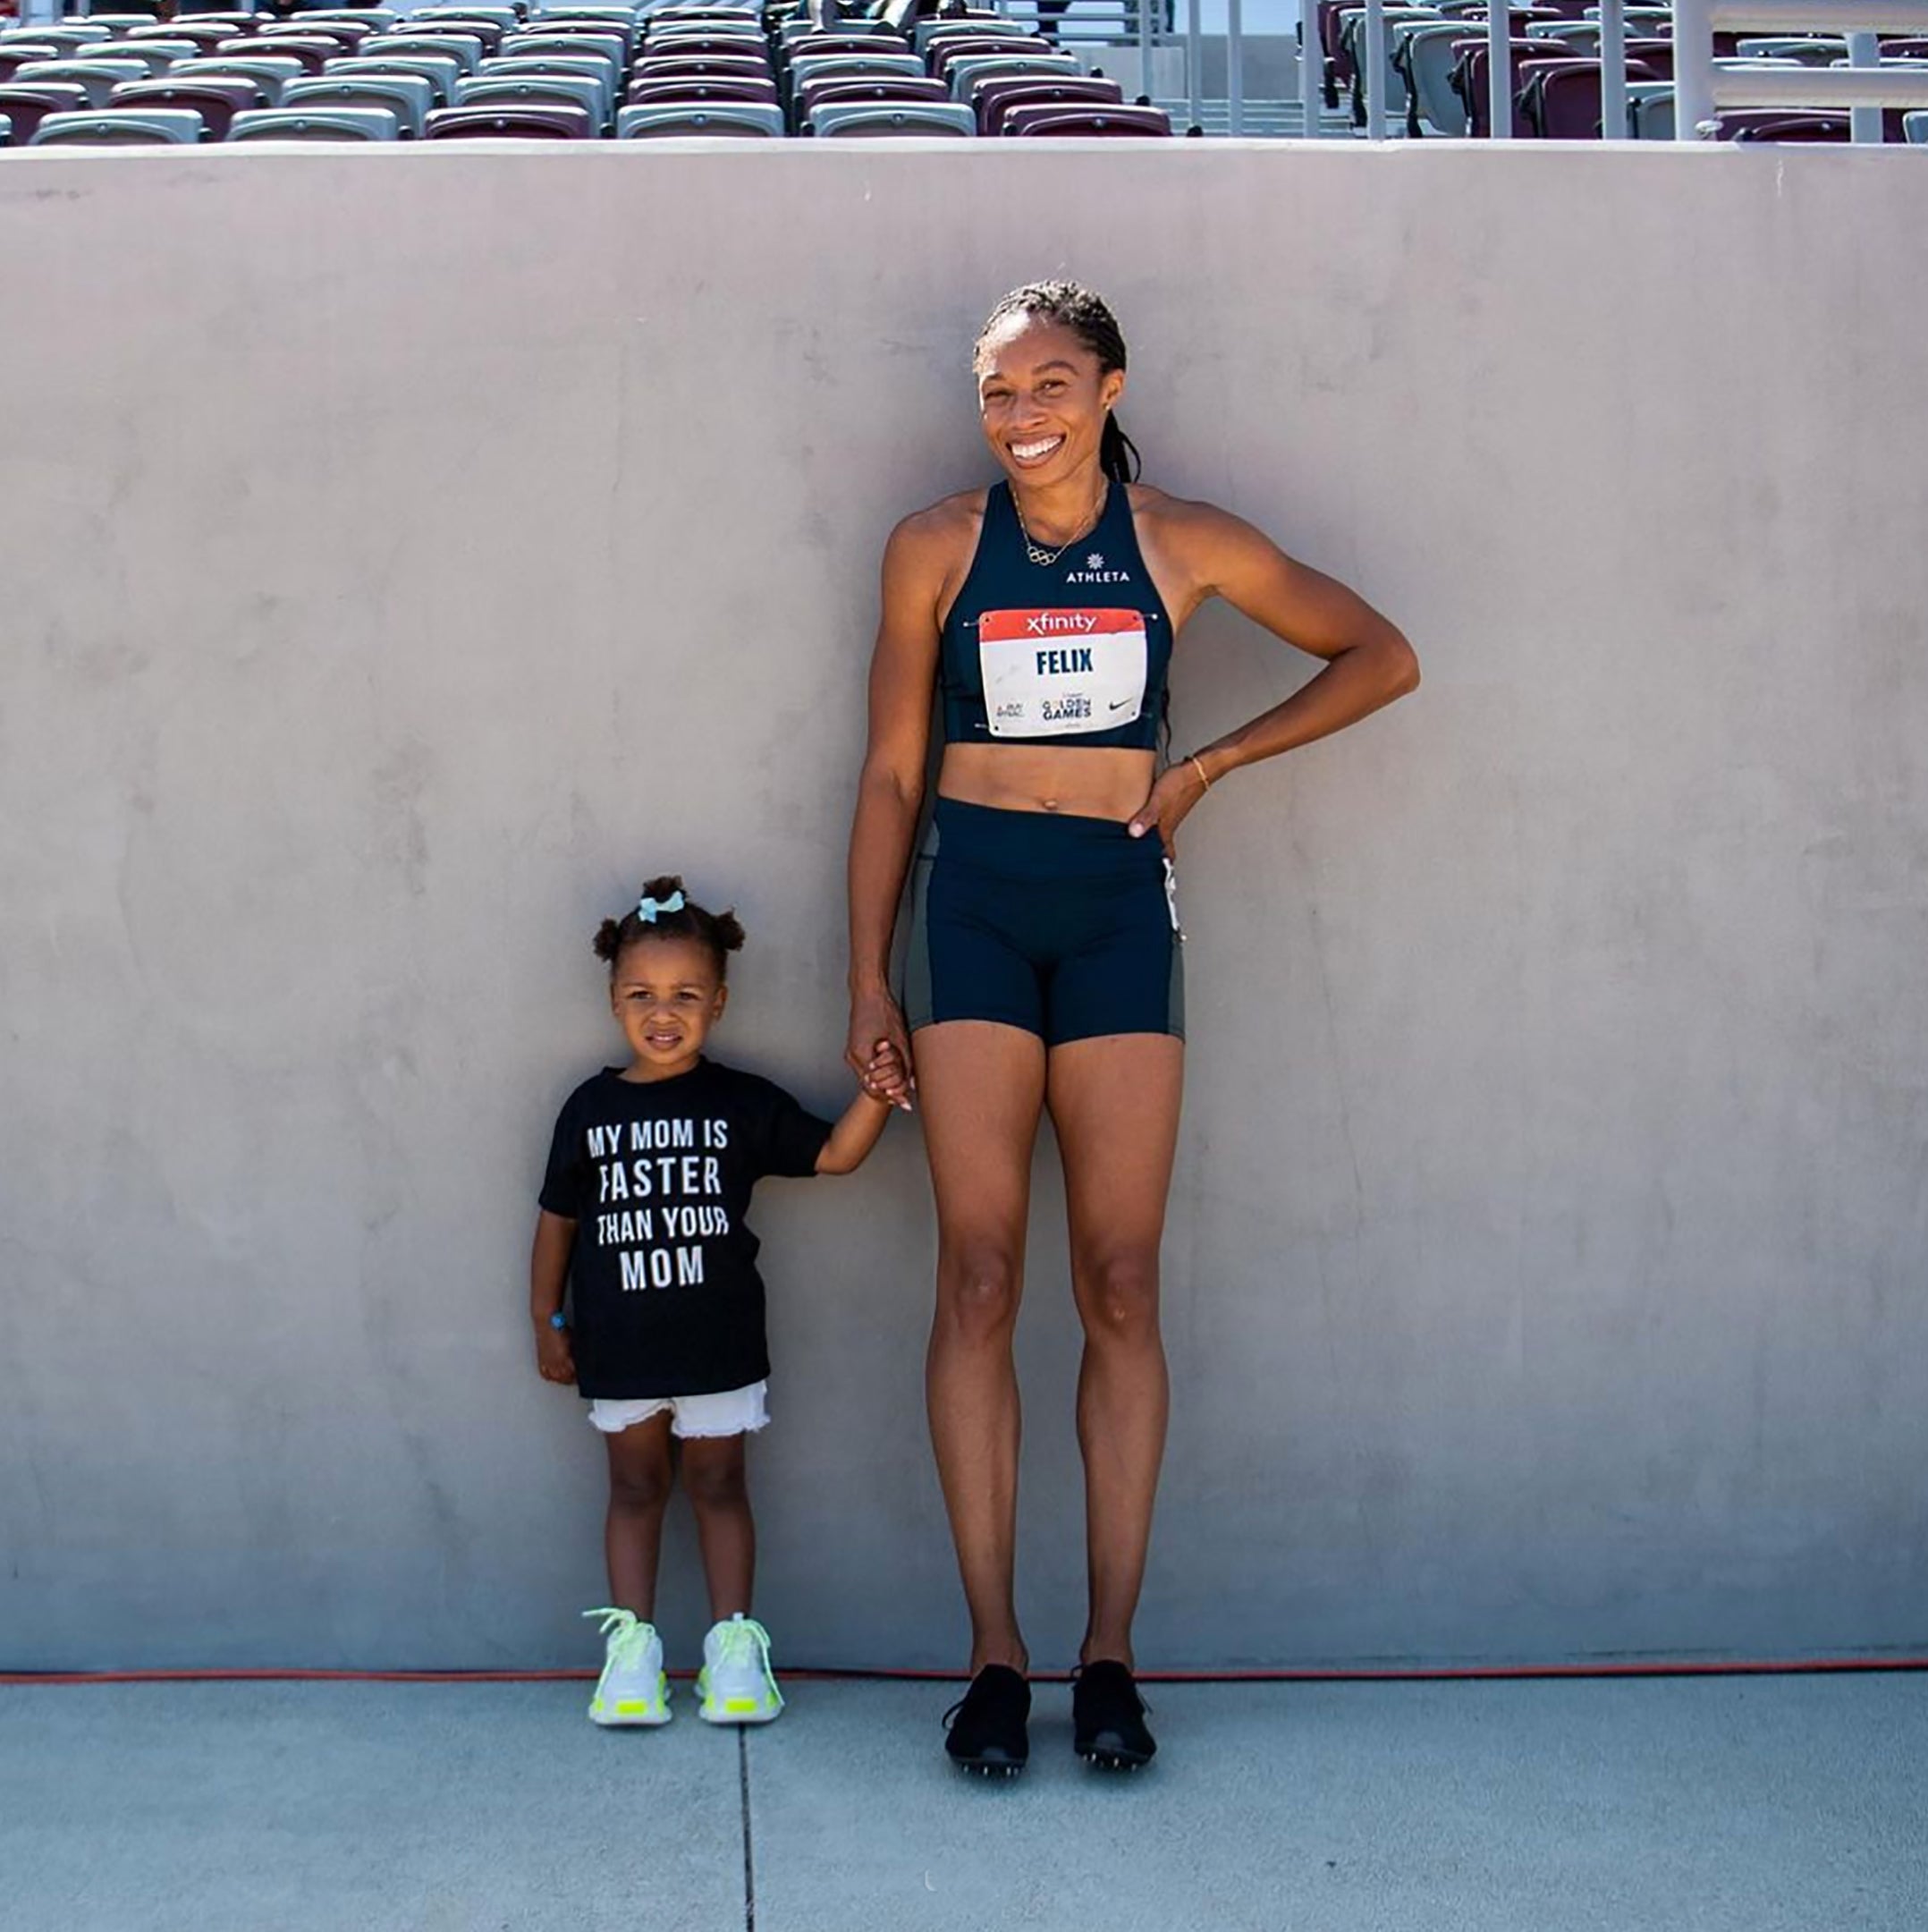 My mom is faster than your mom shirt: Allyson Felix